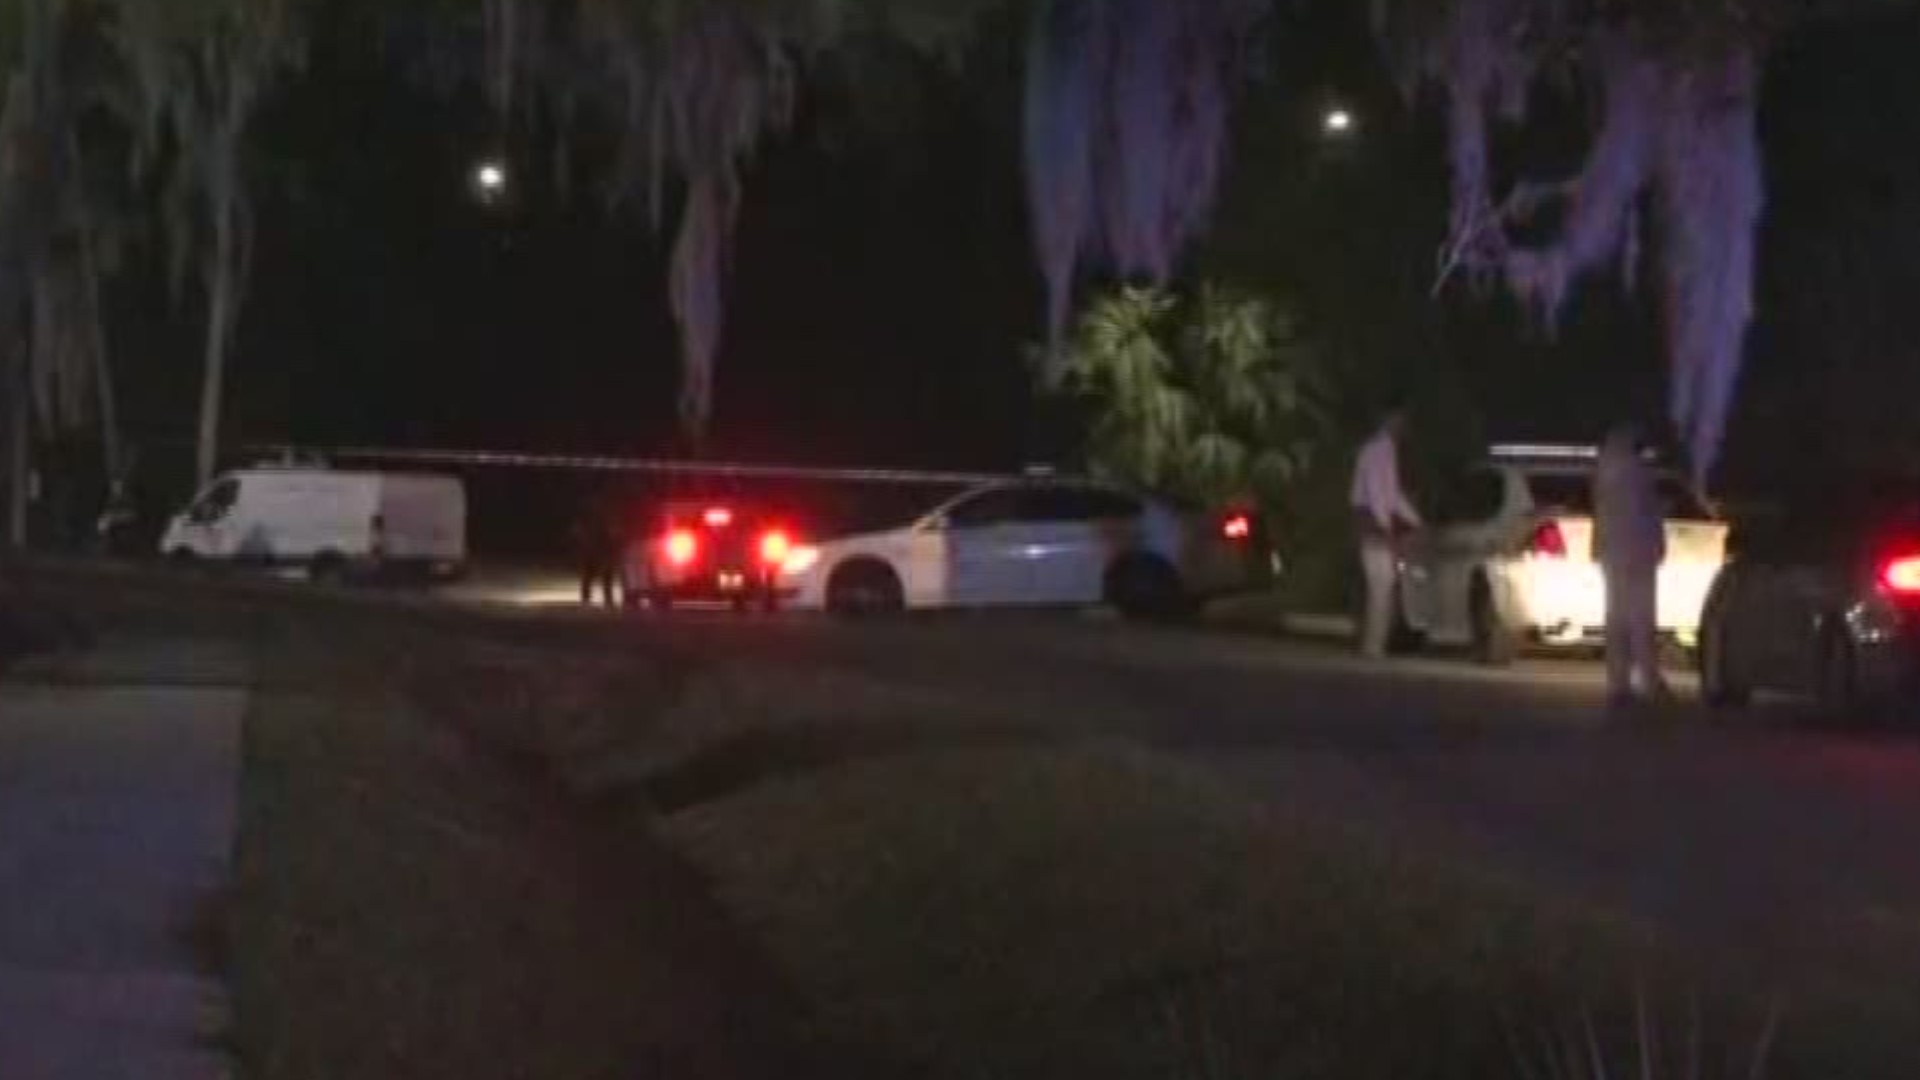 The Jacksonville Sheriff's Office has detained several people for questioning regarding the incident.